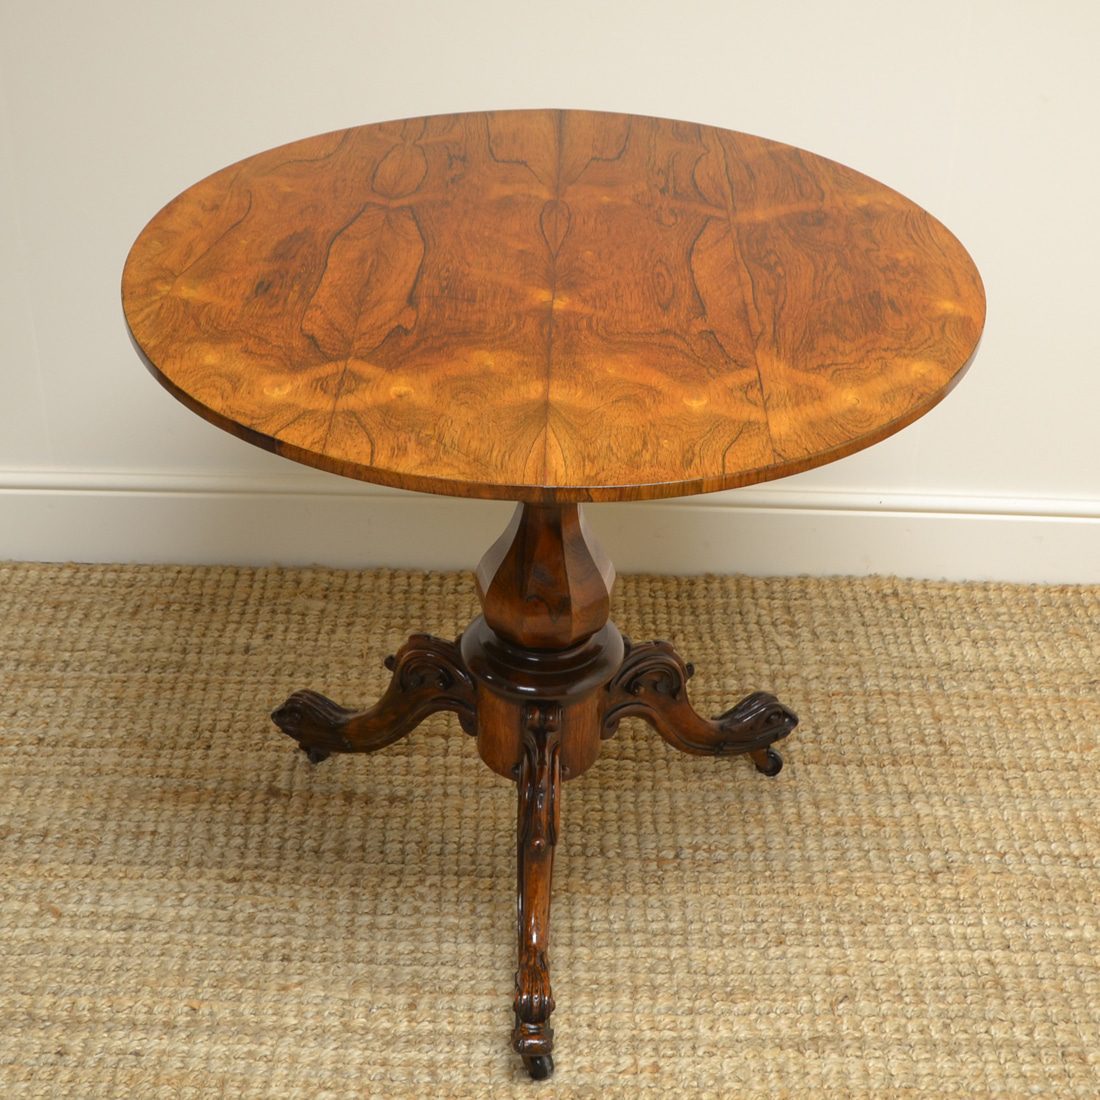 Spectacular Victorian Rosewood Antique Circular Table with Dolphin Carvings